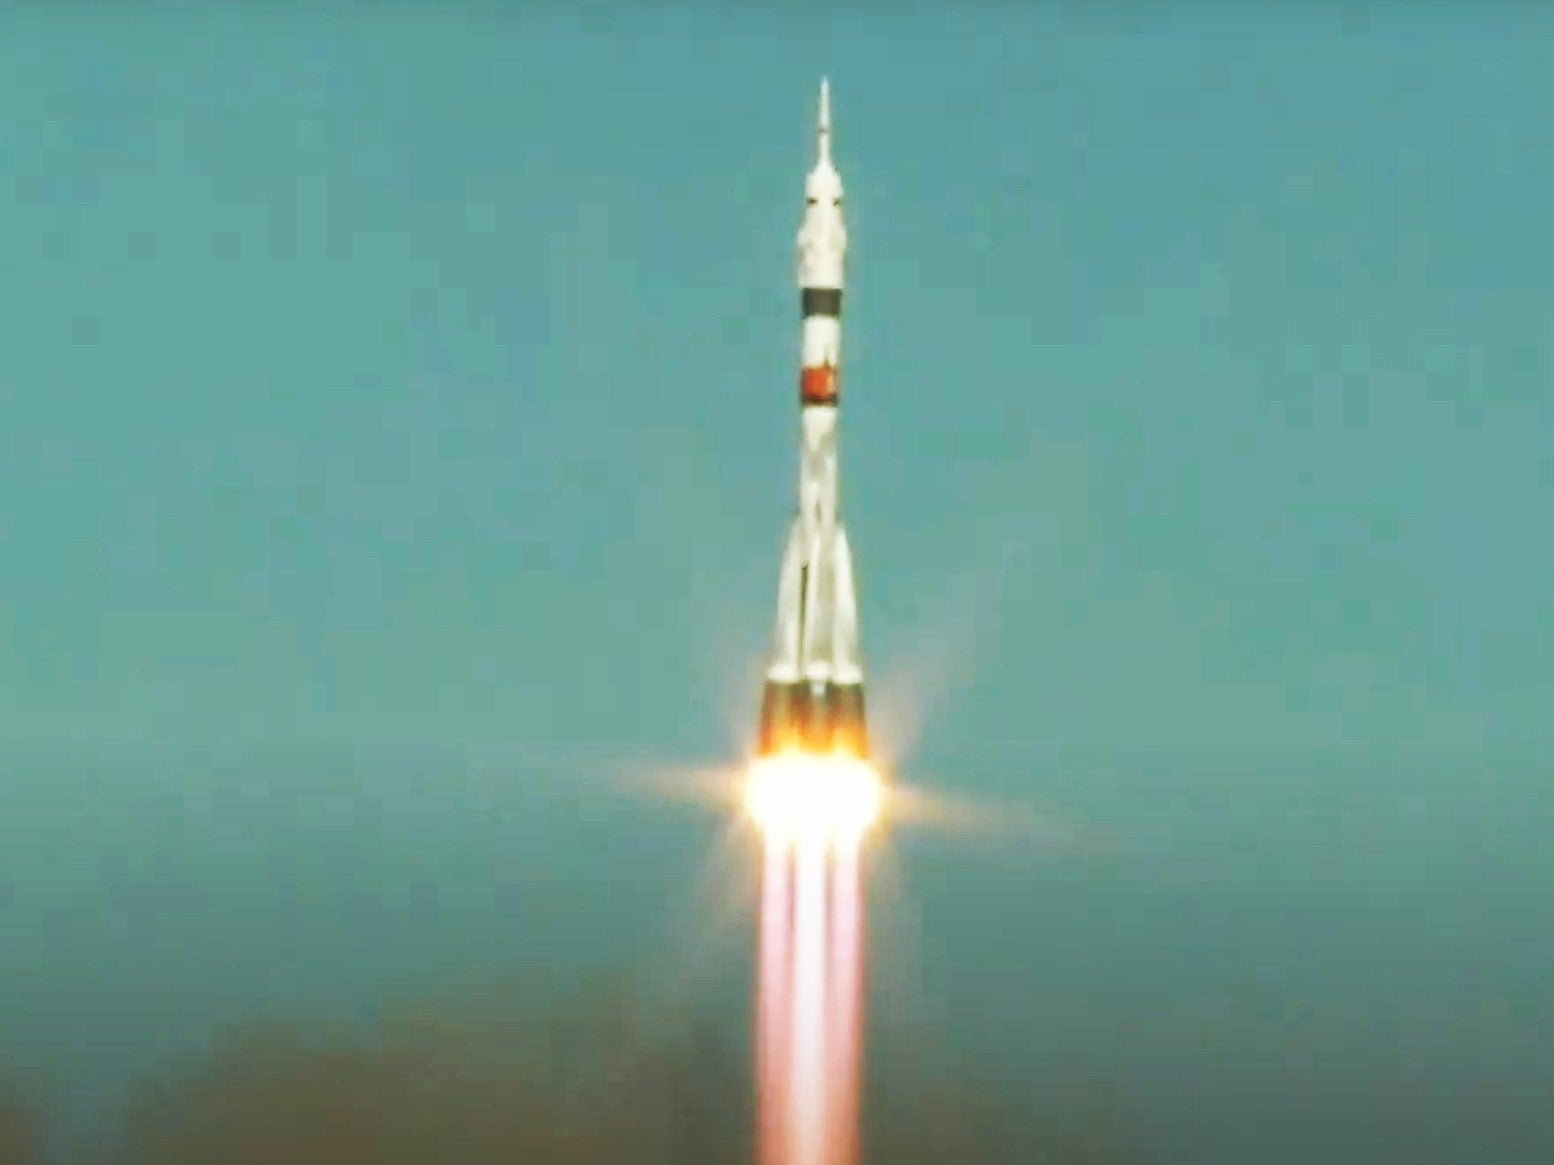 The Soyuz MS-17 reached the ISS in just 3 hours and 3 minutes